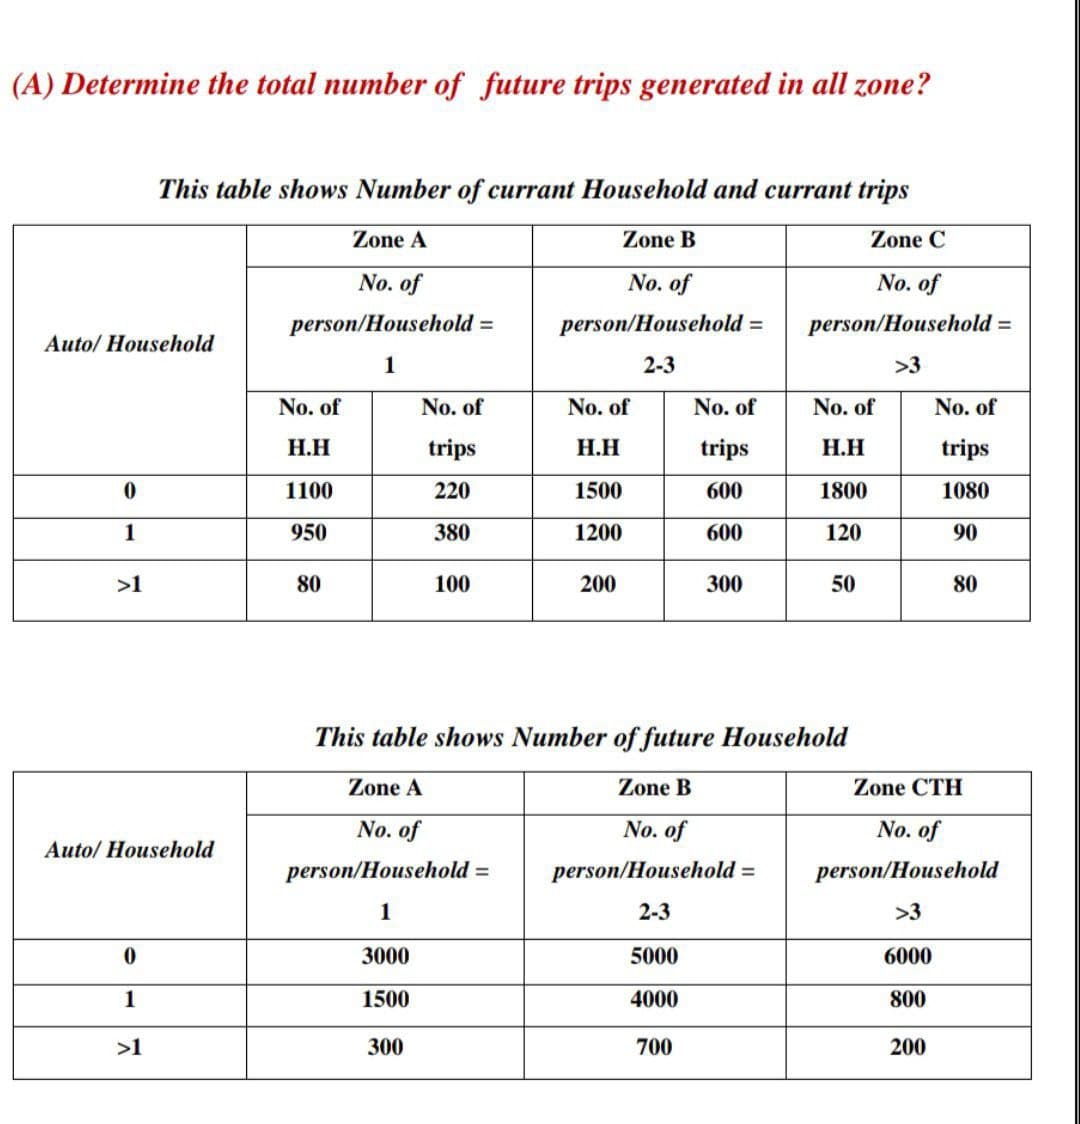 (A) Determine the total number of future trips generated in all zone?
This table shows Number of currant Household and currant trips
Zone A
Zone B
Zone C
No. of
No. of
No. of
person/Household =
person/Household =
person/Household =
Auto/ Household
1
2-3
>3
No. of
No. of
No. of
No. of
No. of
No. of
Н.Н
trips
Н.Н
trips
Н.Н
trips
1100
220
1500
600
1800
1080
1
950
380
1200
600
120
90
>1
80
100
200
300
50
80
This table shows Number of future Household
Zone A
Zone B
Zone CTH
No. of
No. of
No. of
Auto/ Household
person/Household =
person/Household =
person/Household
1
2-3
>3
3000
5000
6000
1
1500
4000
800
>1
300
700
200
